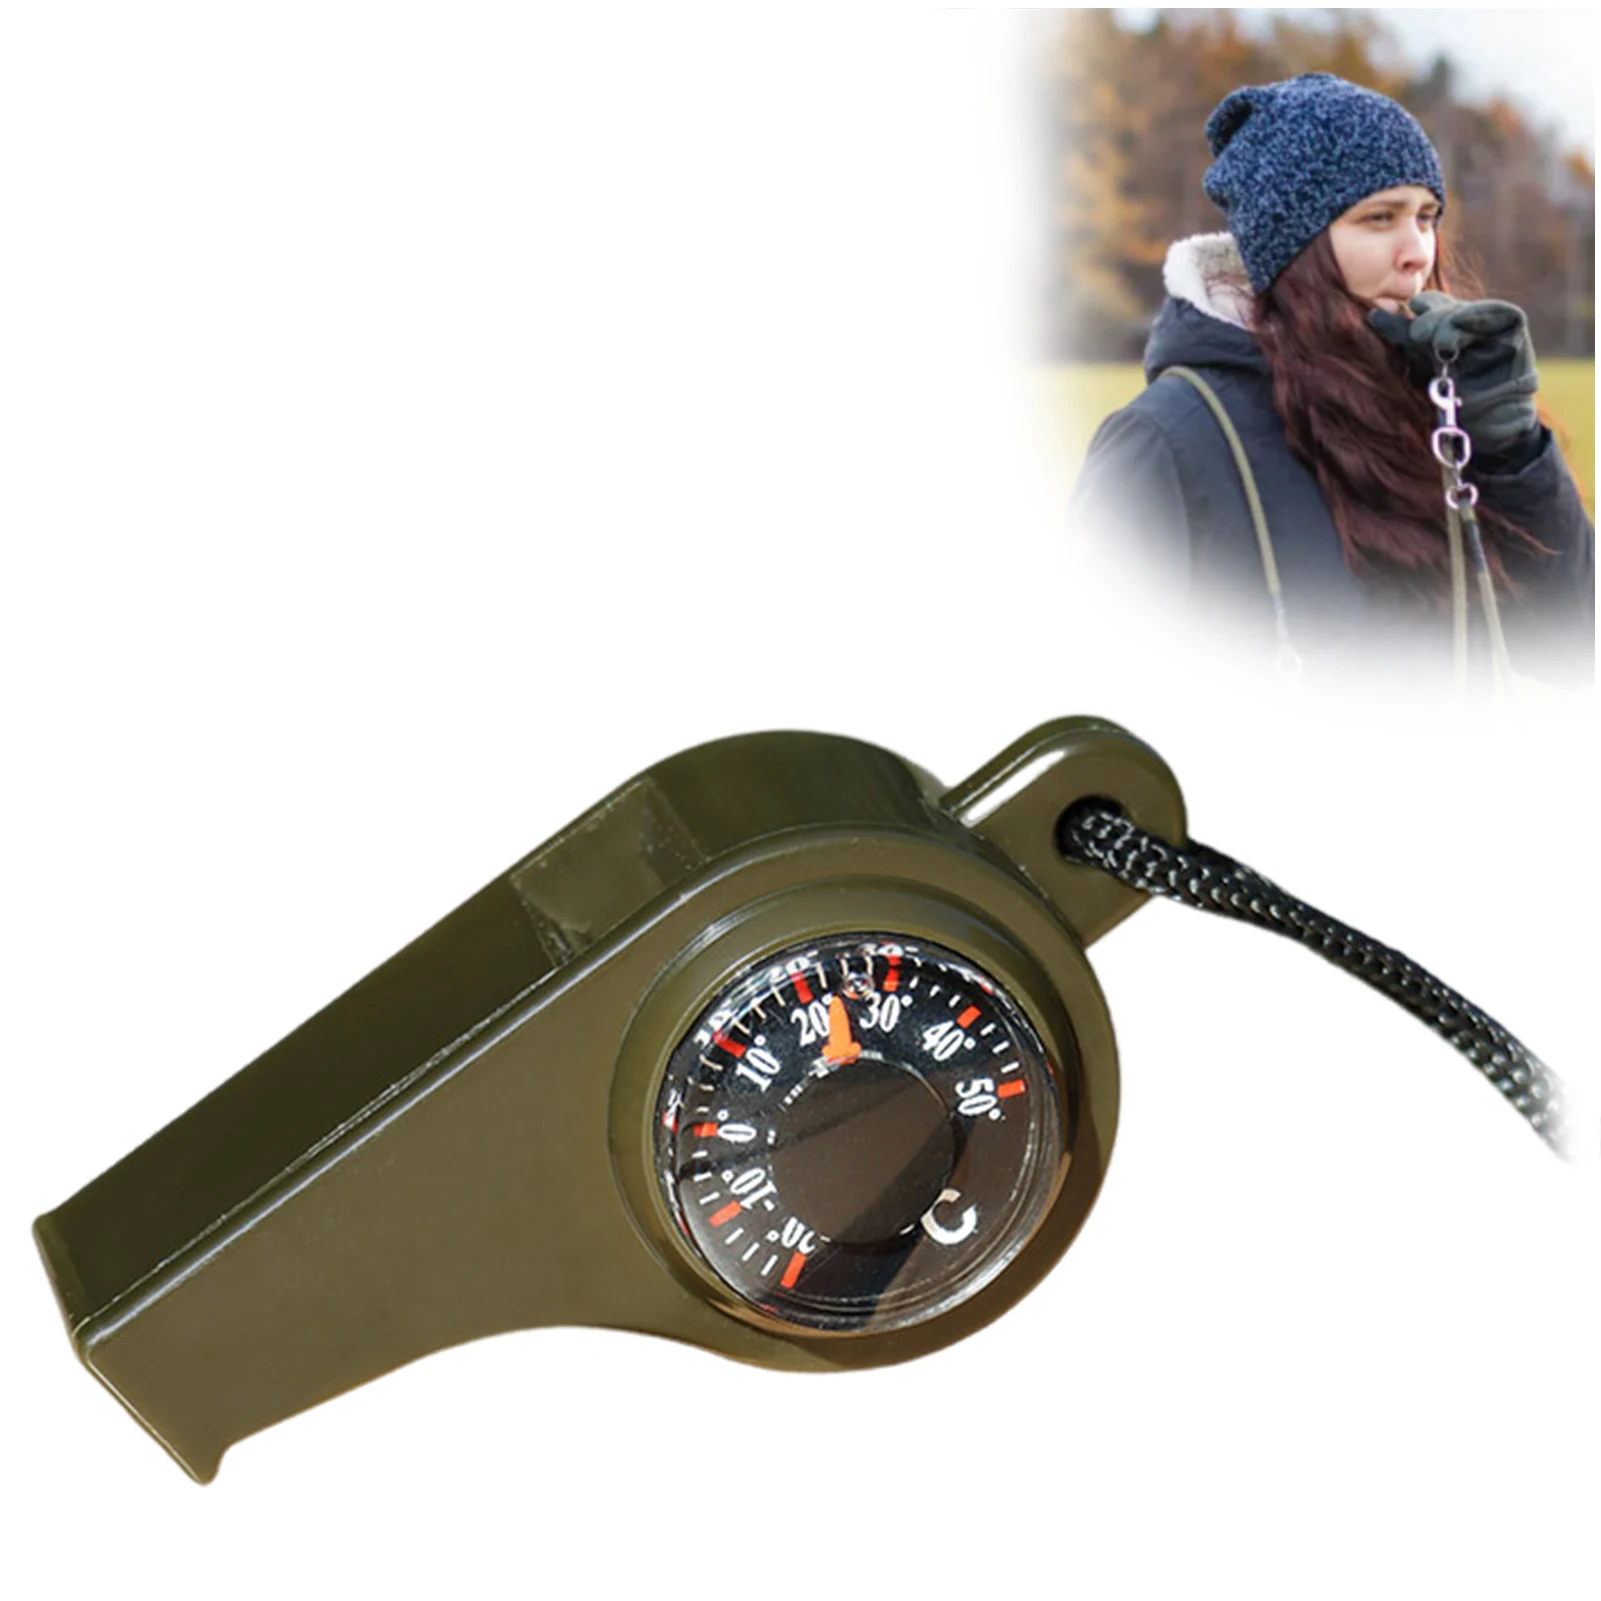 

Safety Survival Whistles Extra Loud Metal Emergency Running Whistles Perfect for Hiking Boating